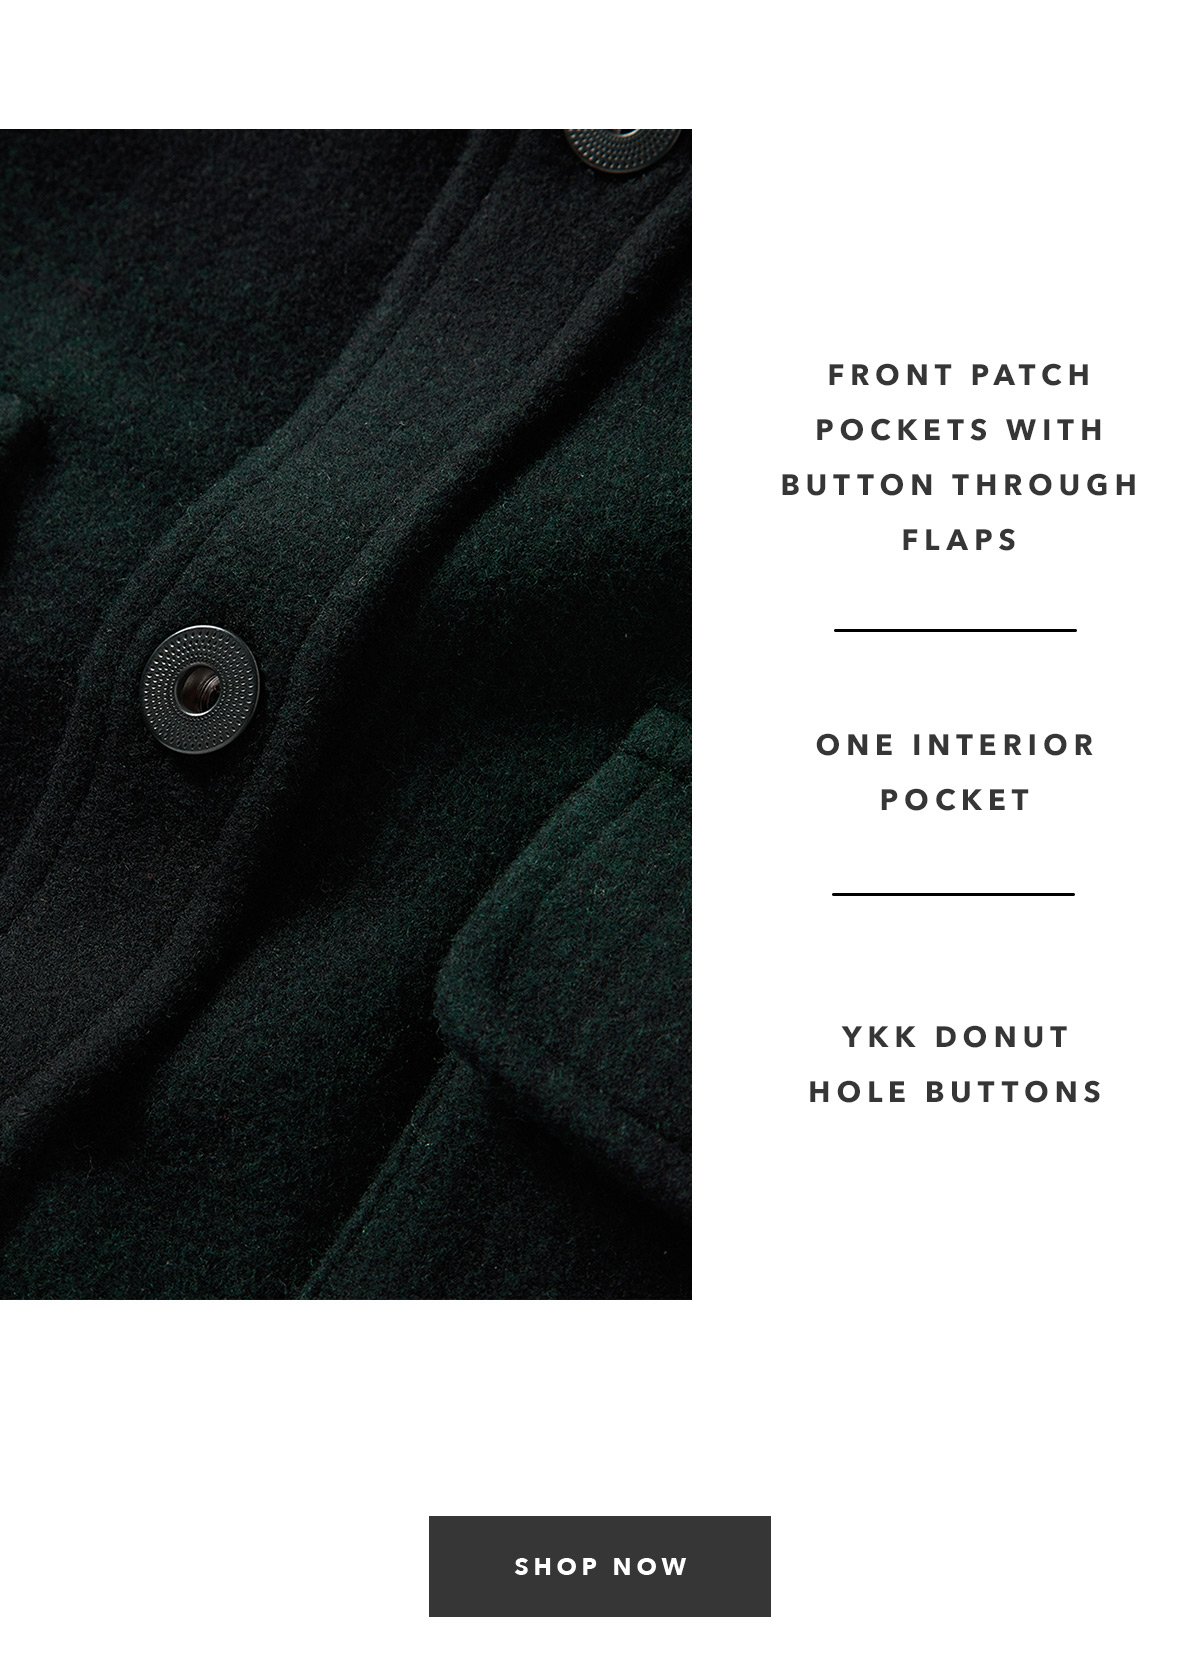 13-oz. 80% wool, 20% reclaimed fibers. Two front patch pockets with button through flaps.  One interior pocket.  YKK donut hole buttons.